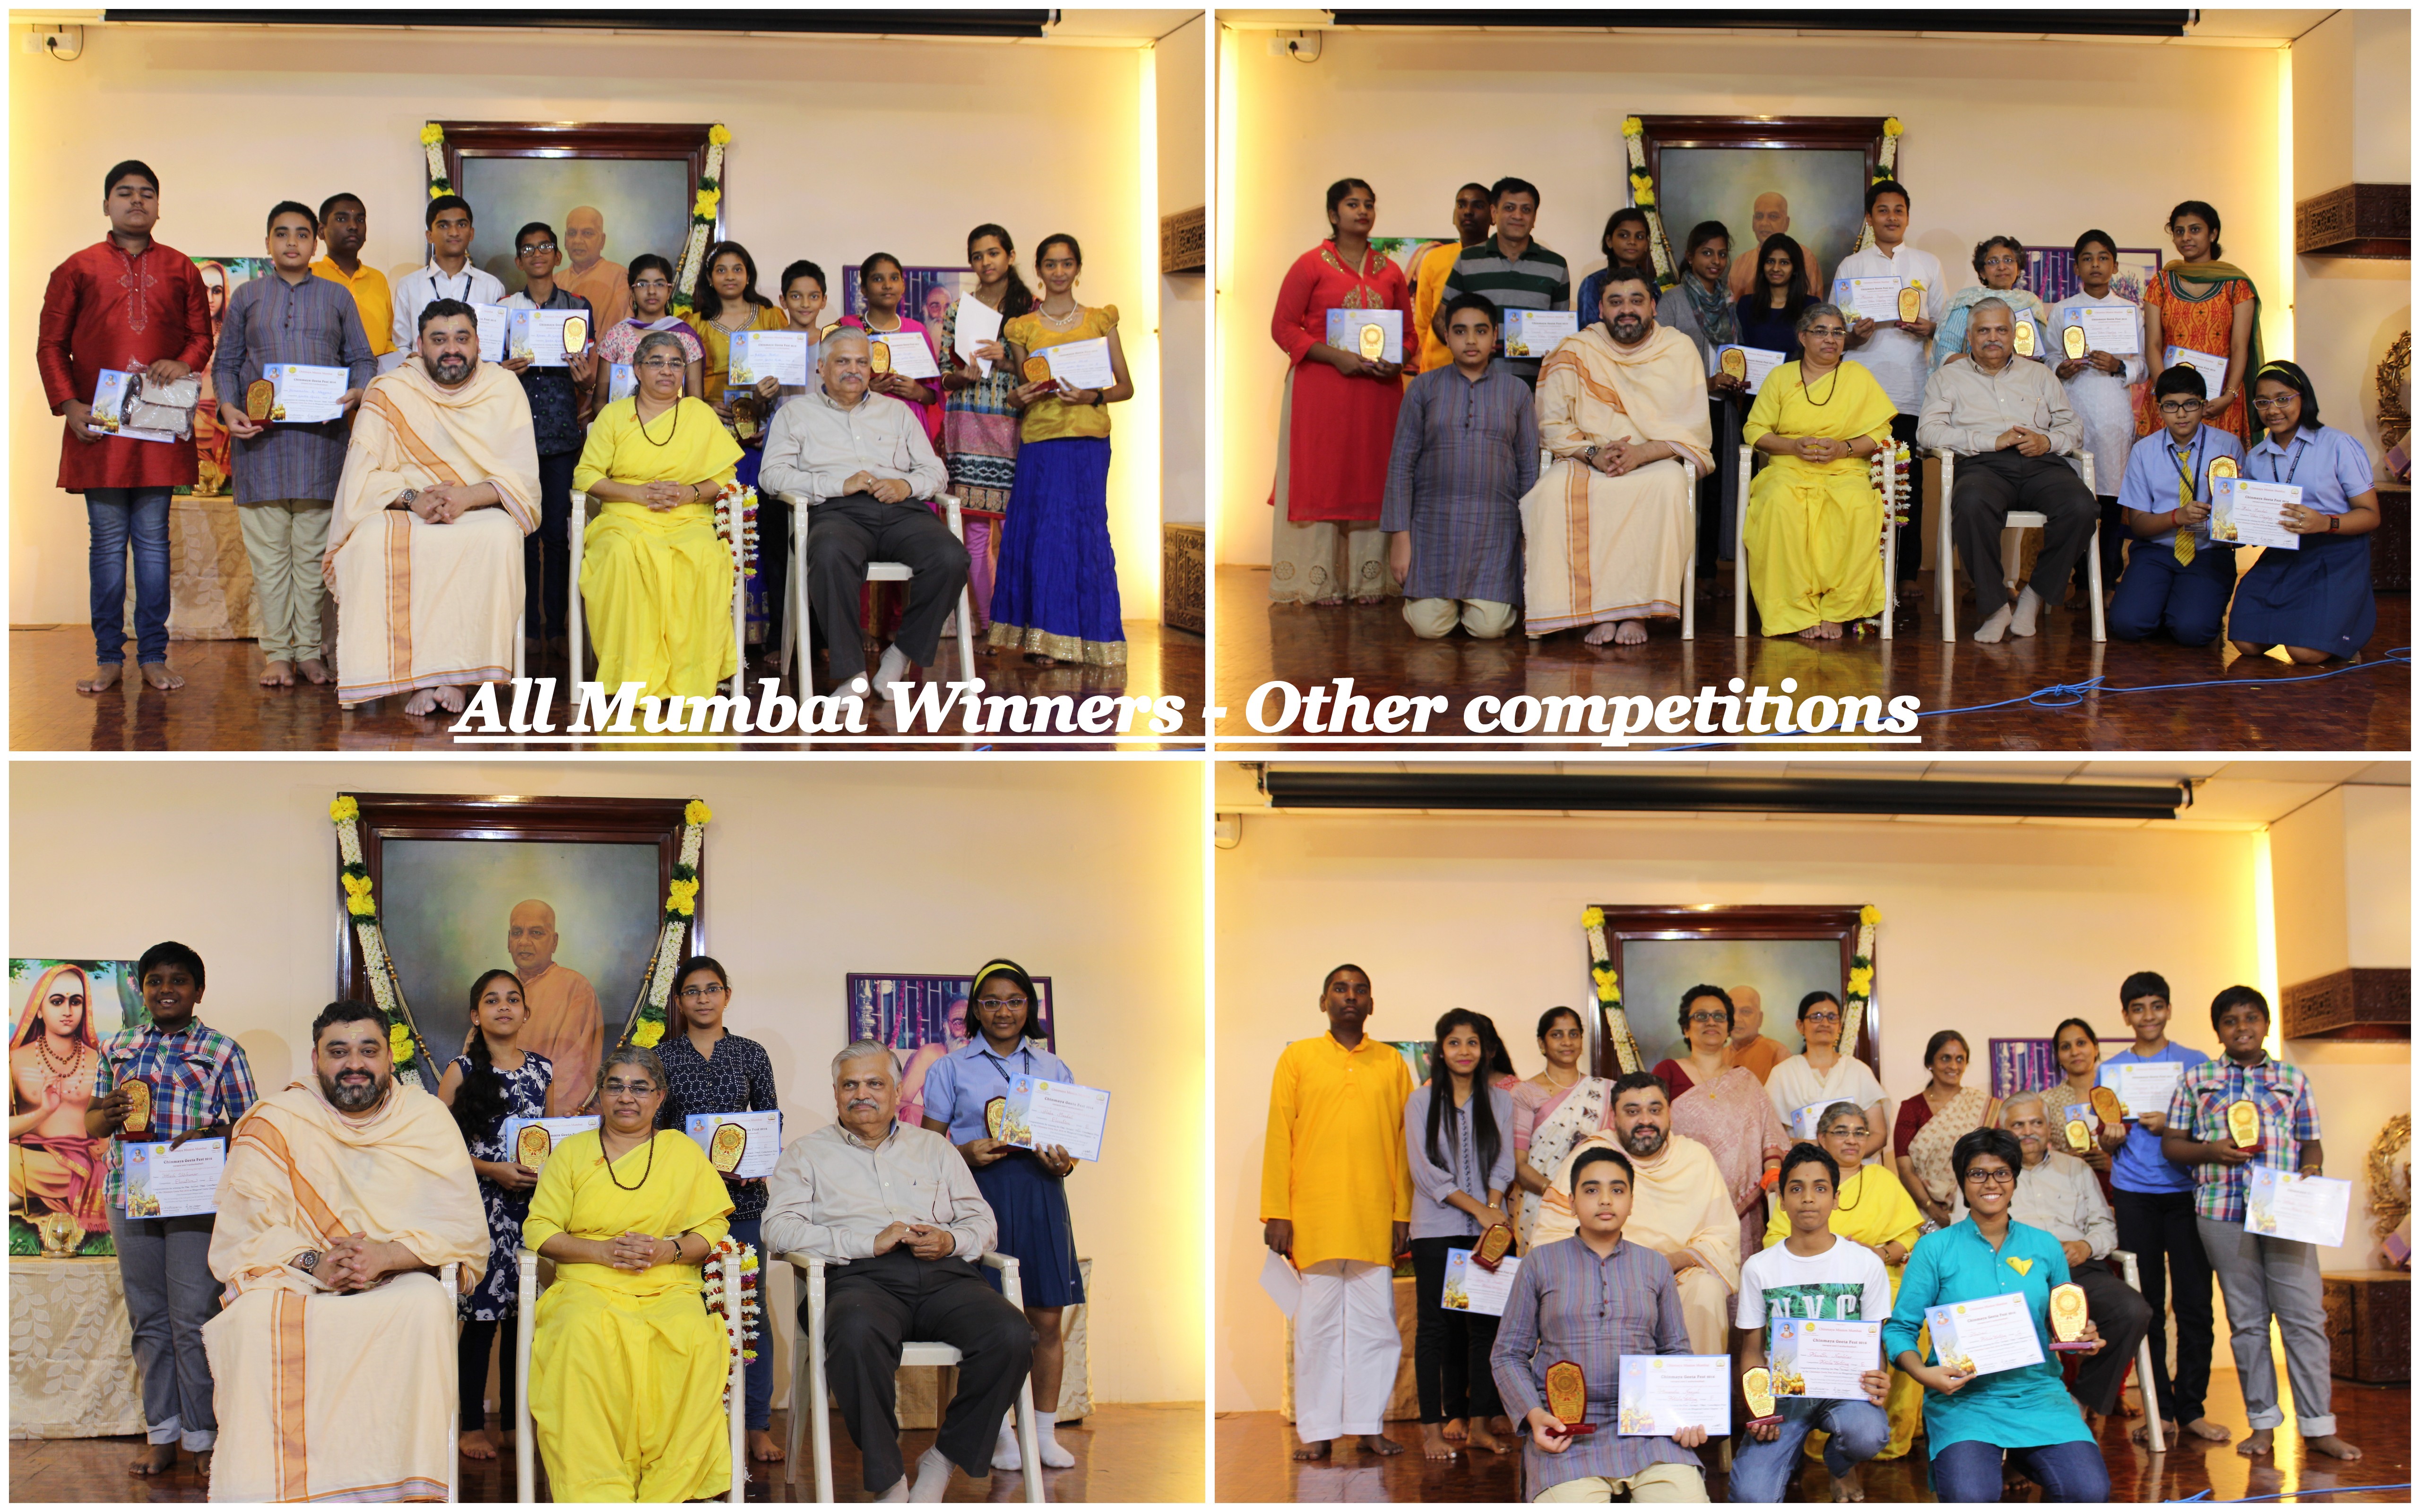 All Mumbai Winners - Other competitions